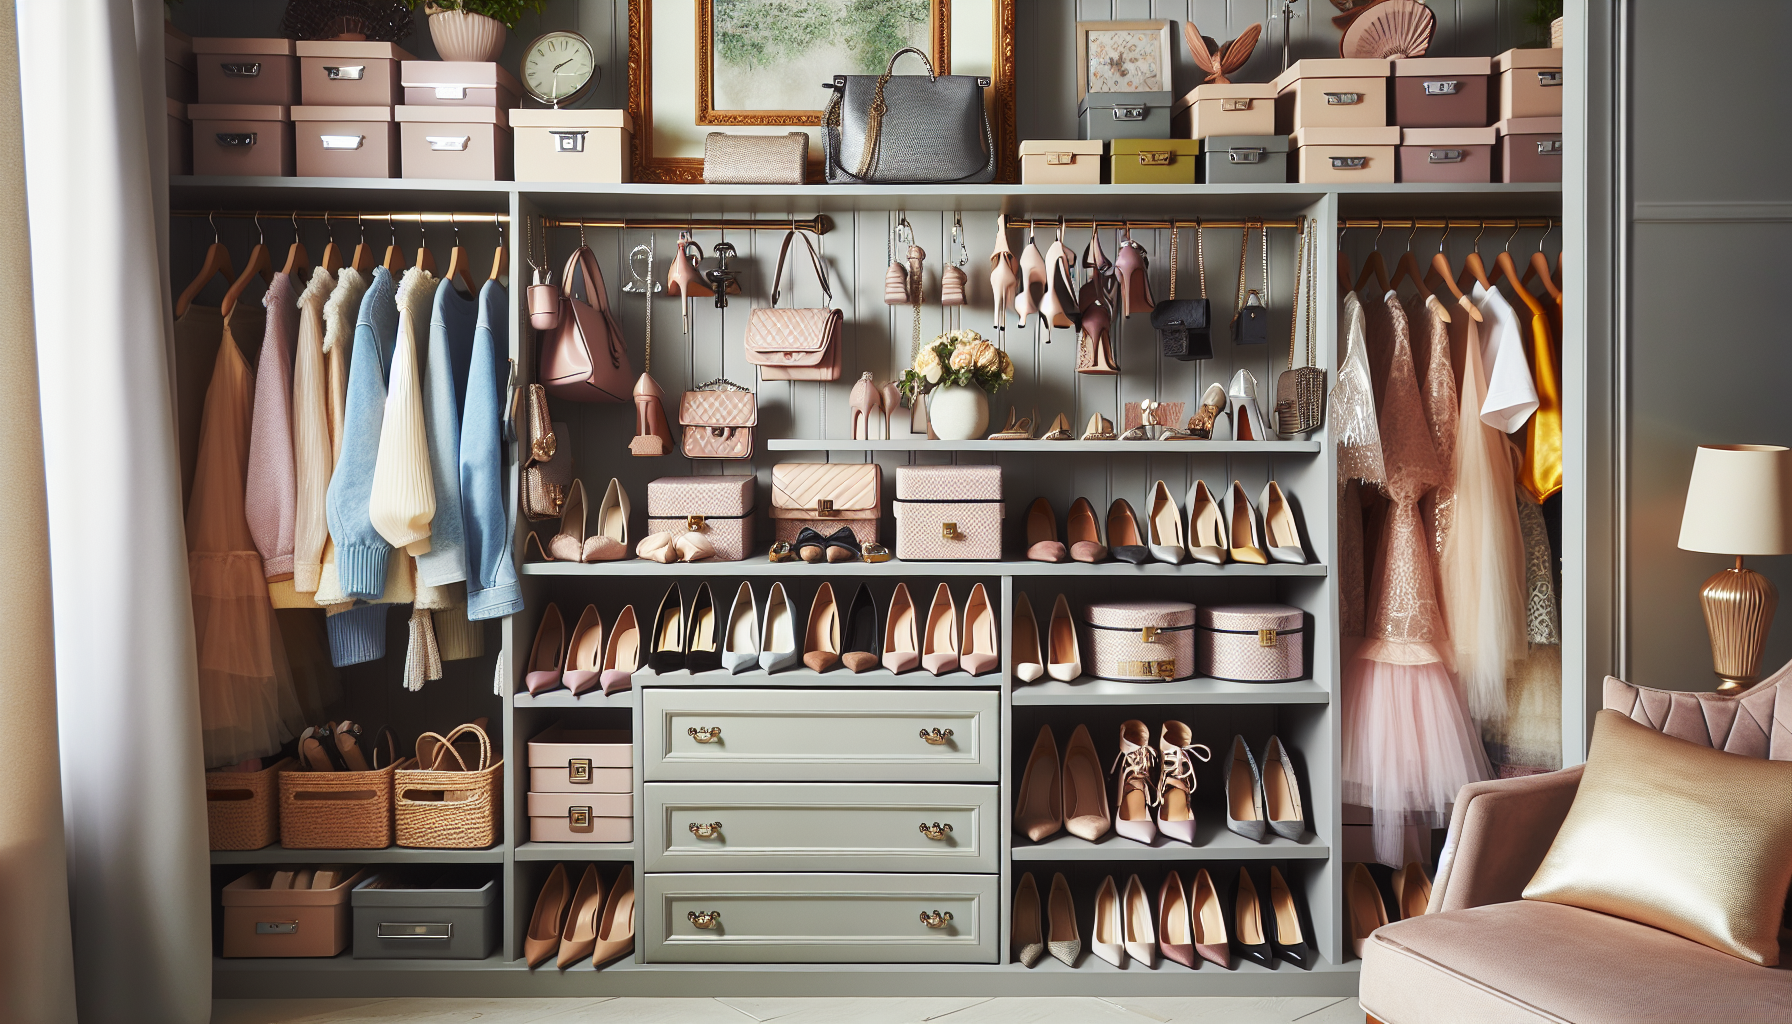 Closet accessories including shoes, purses, and stylish storage solutions